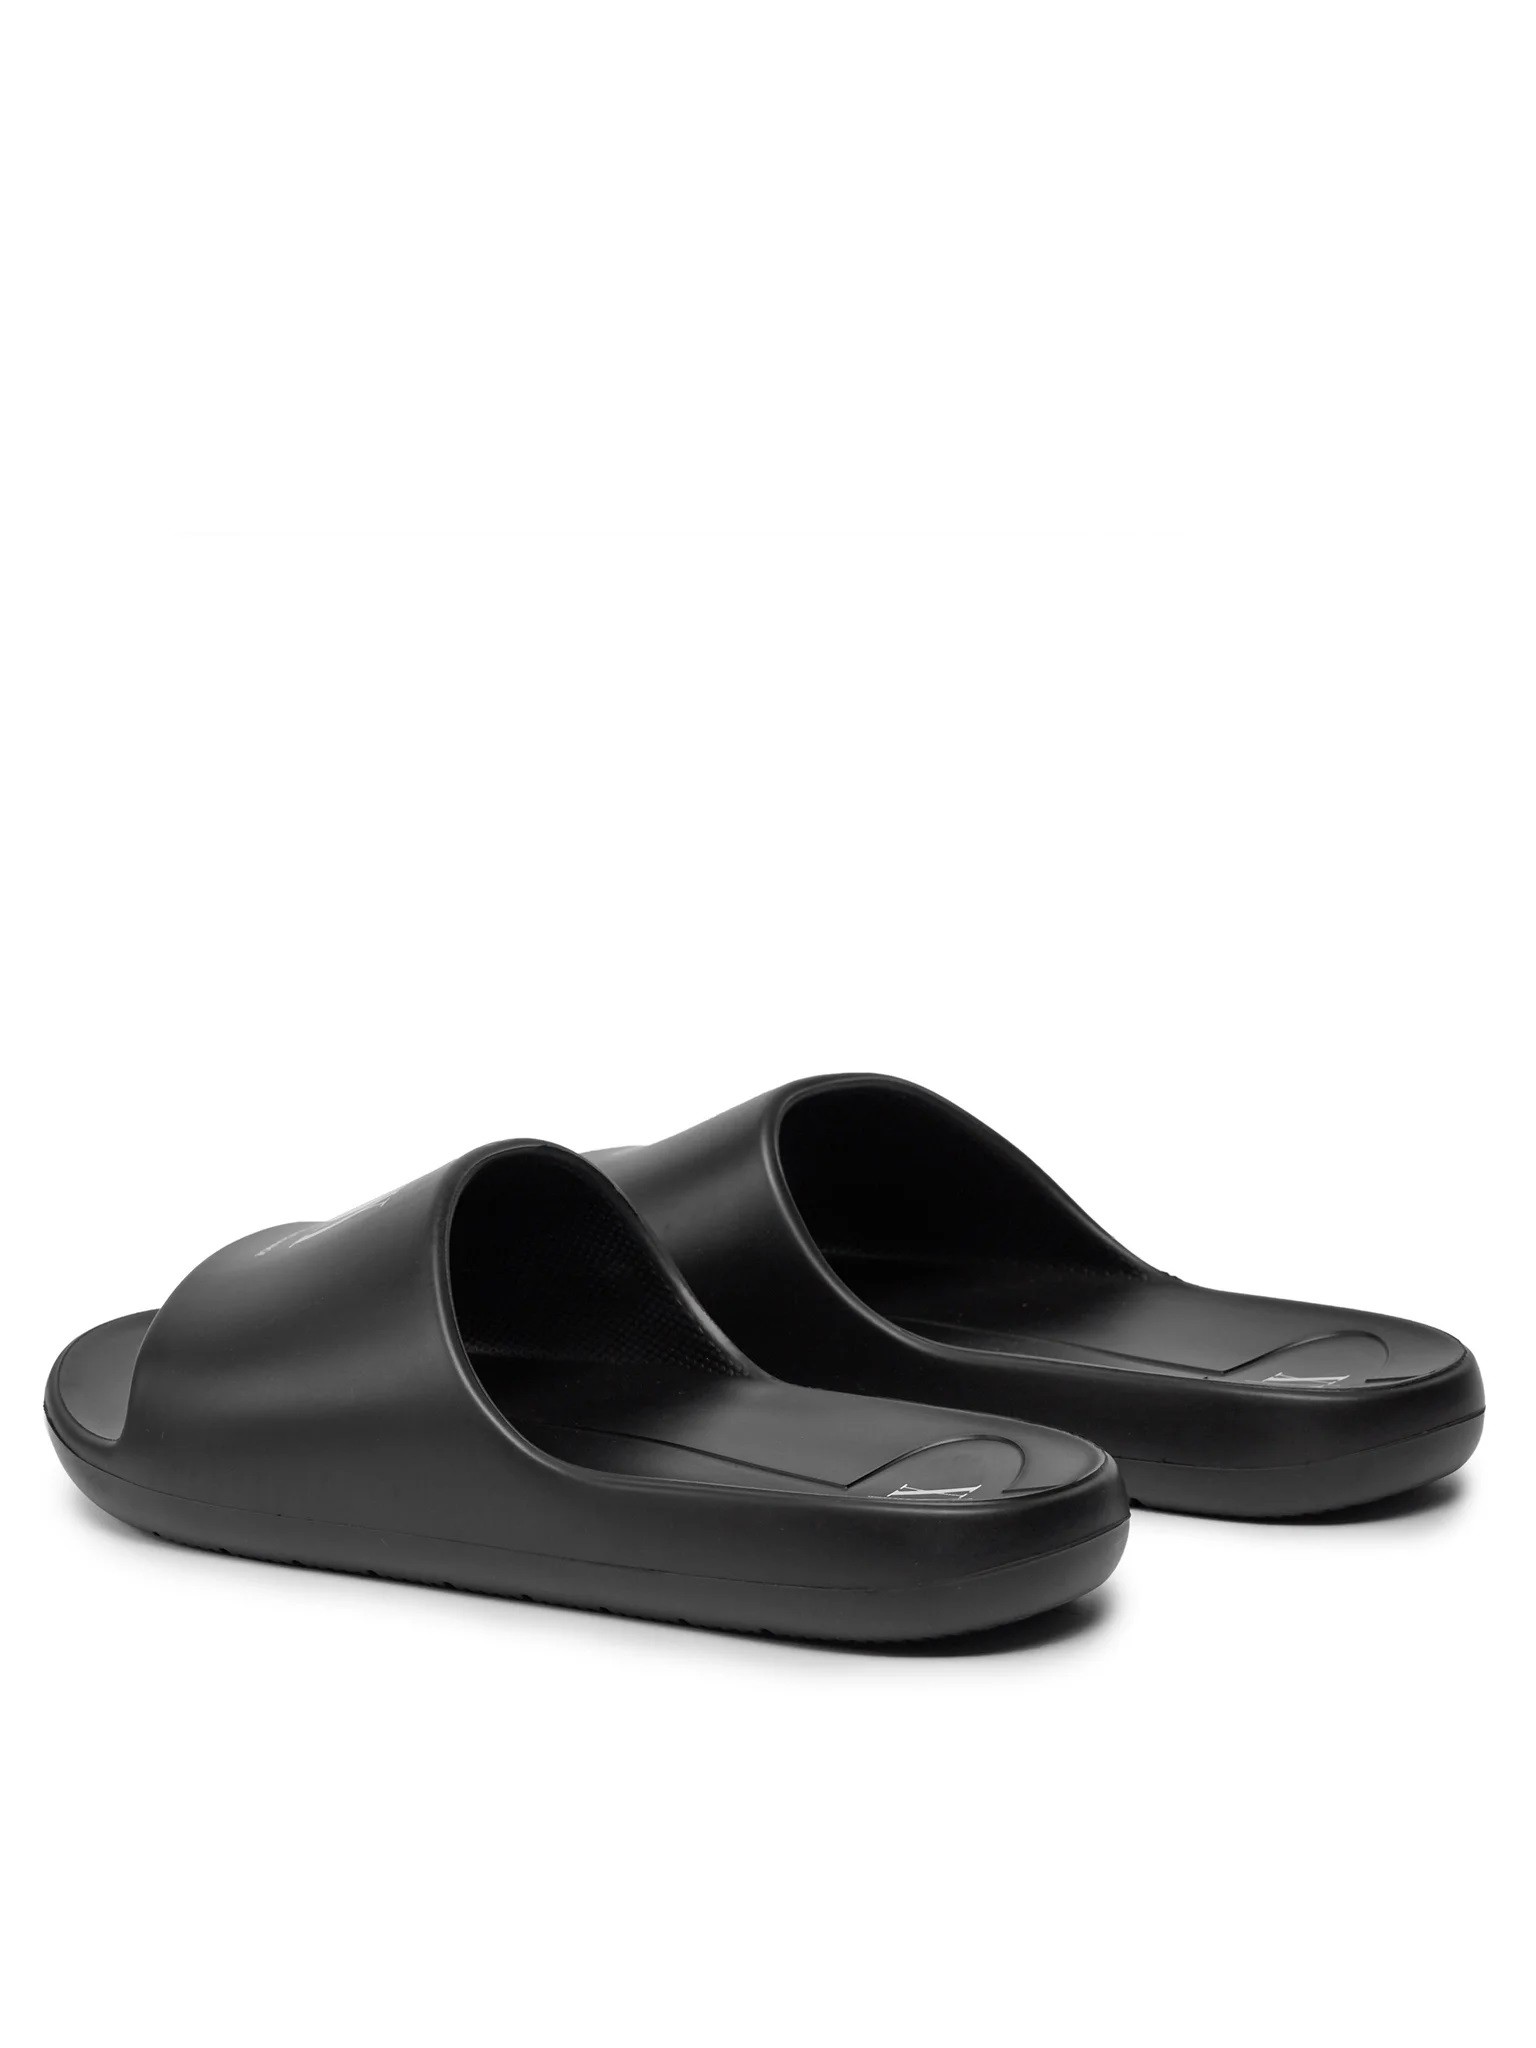 Slip-On Rubber Sole Slippers